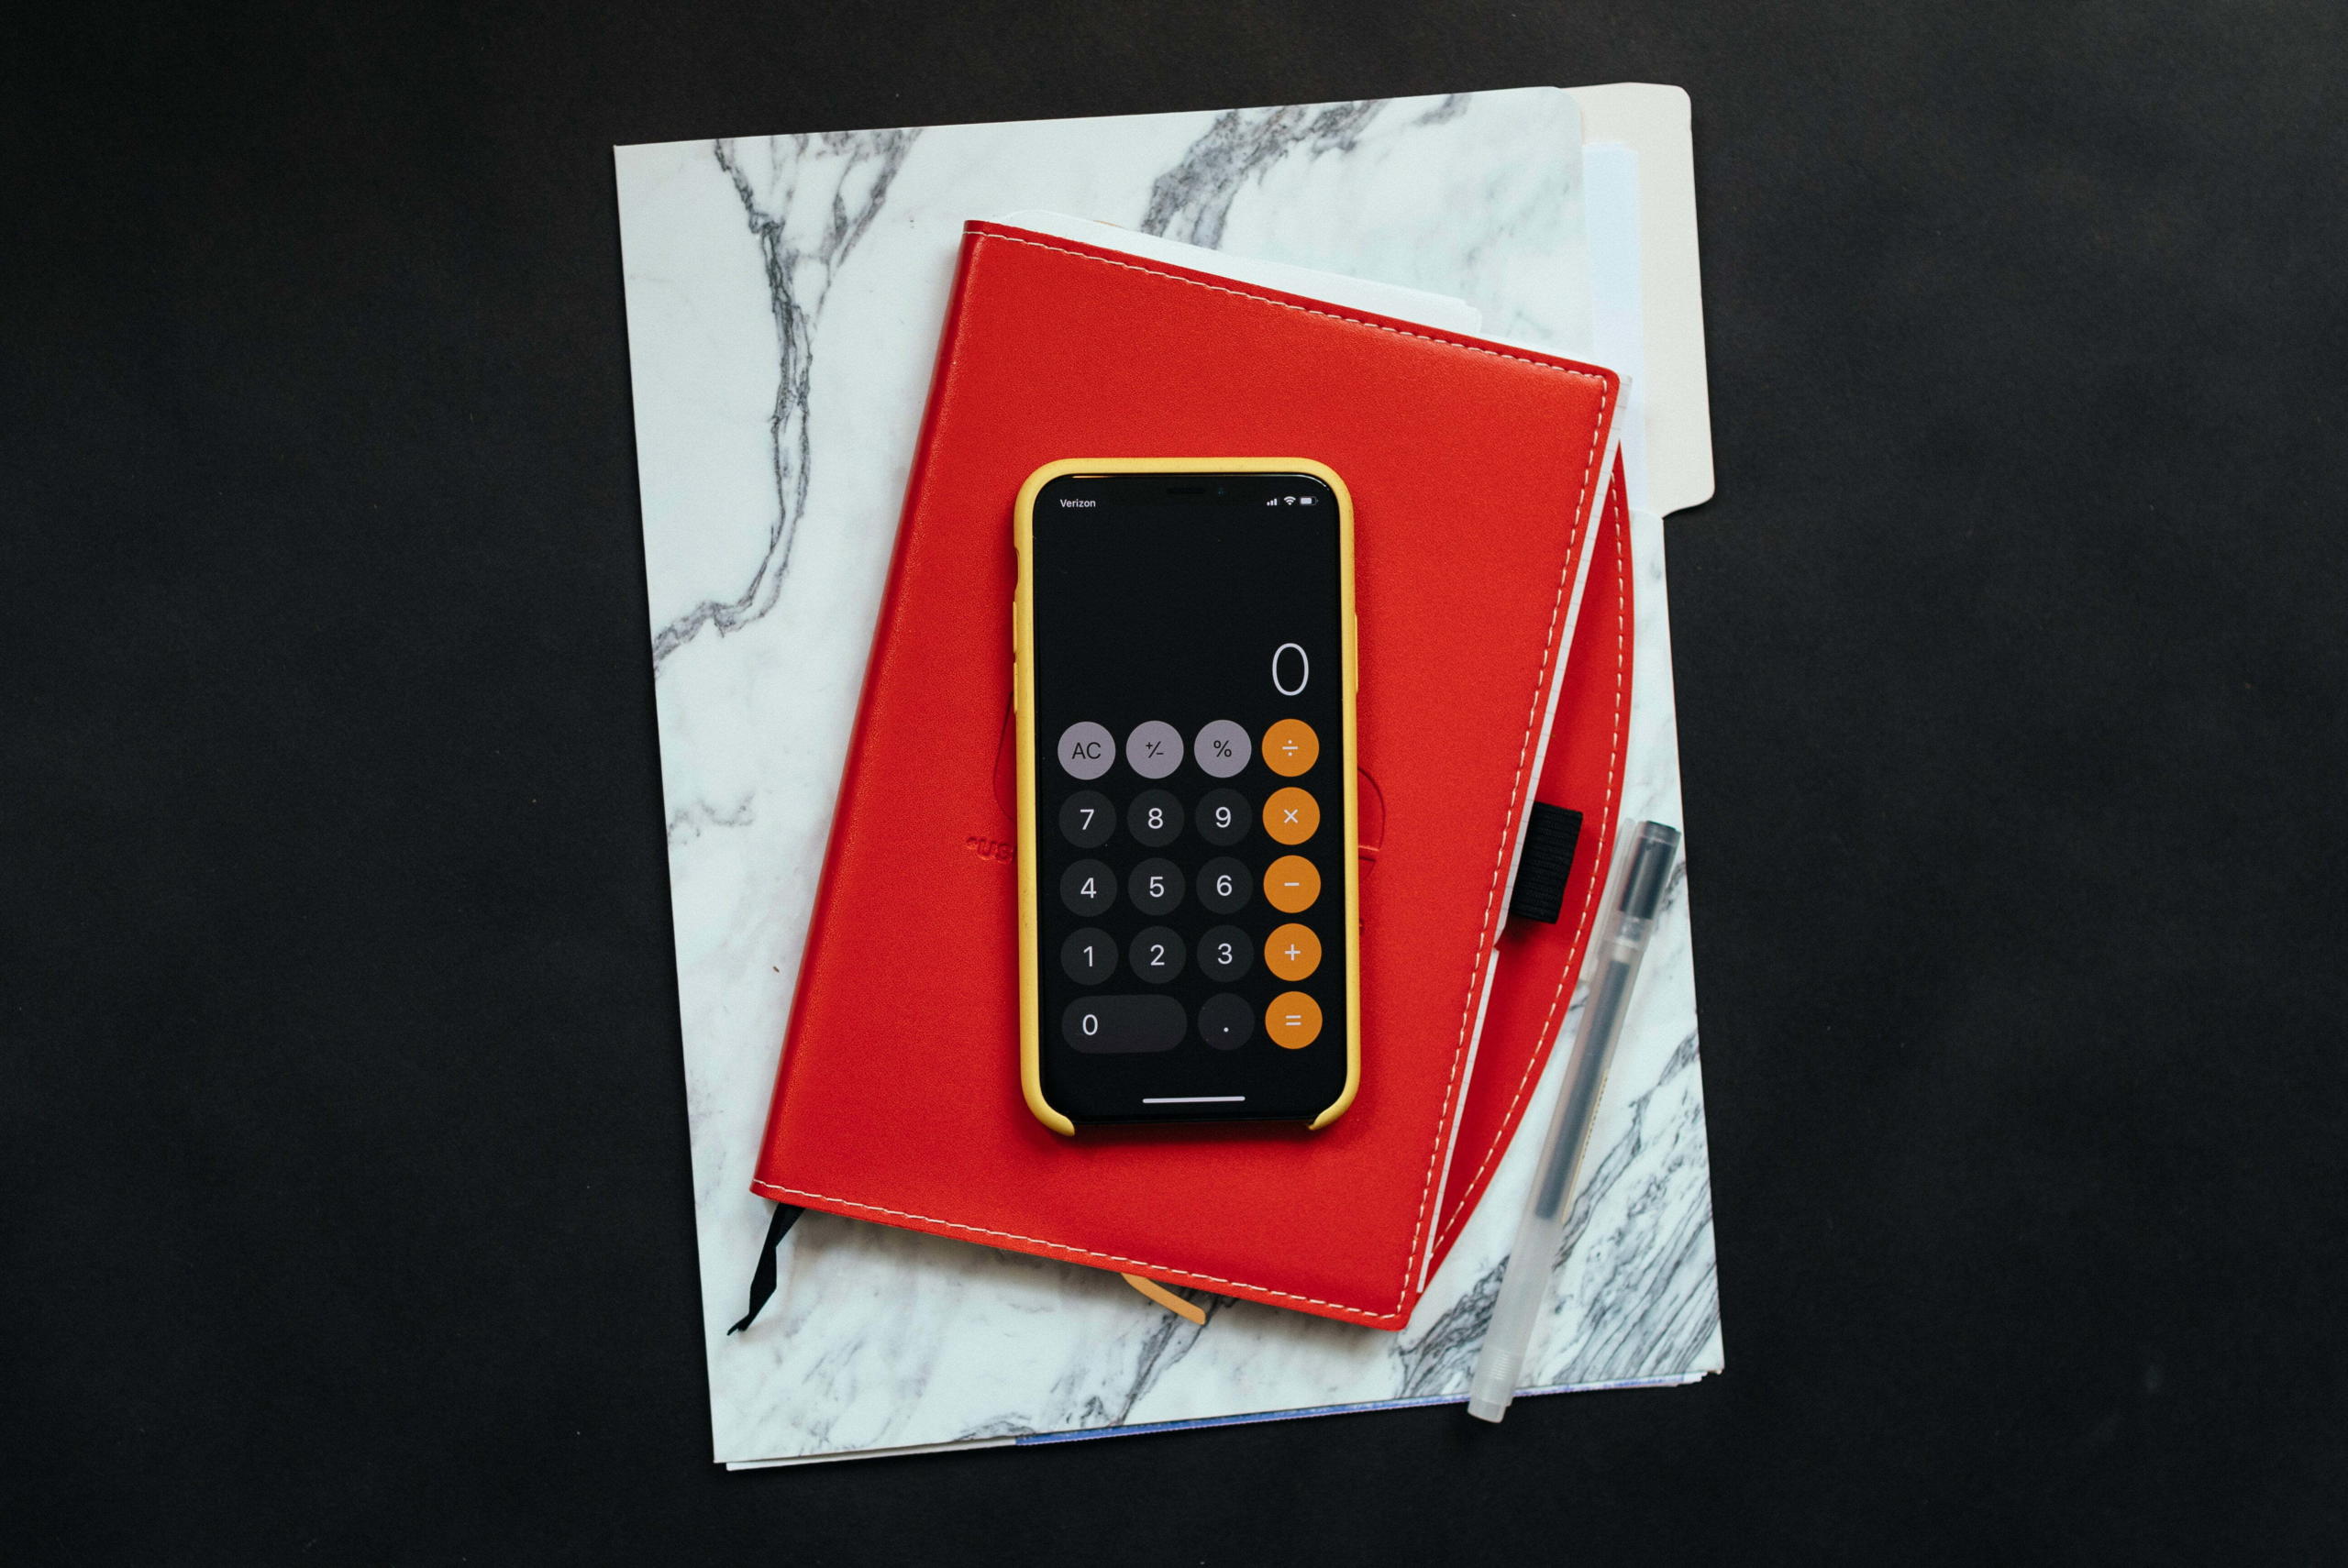 Photograph of a calculator and a notebook